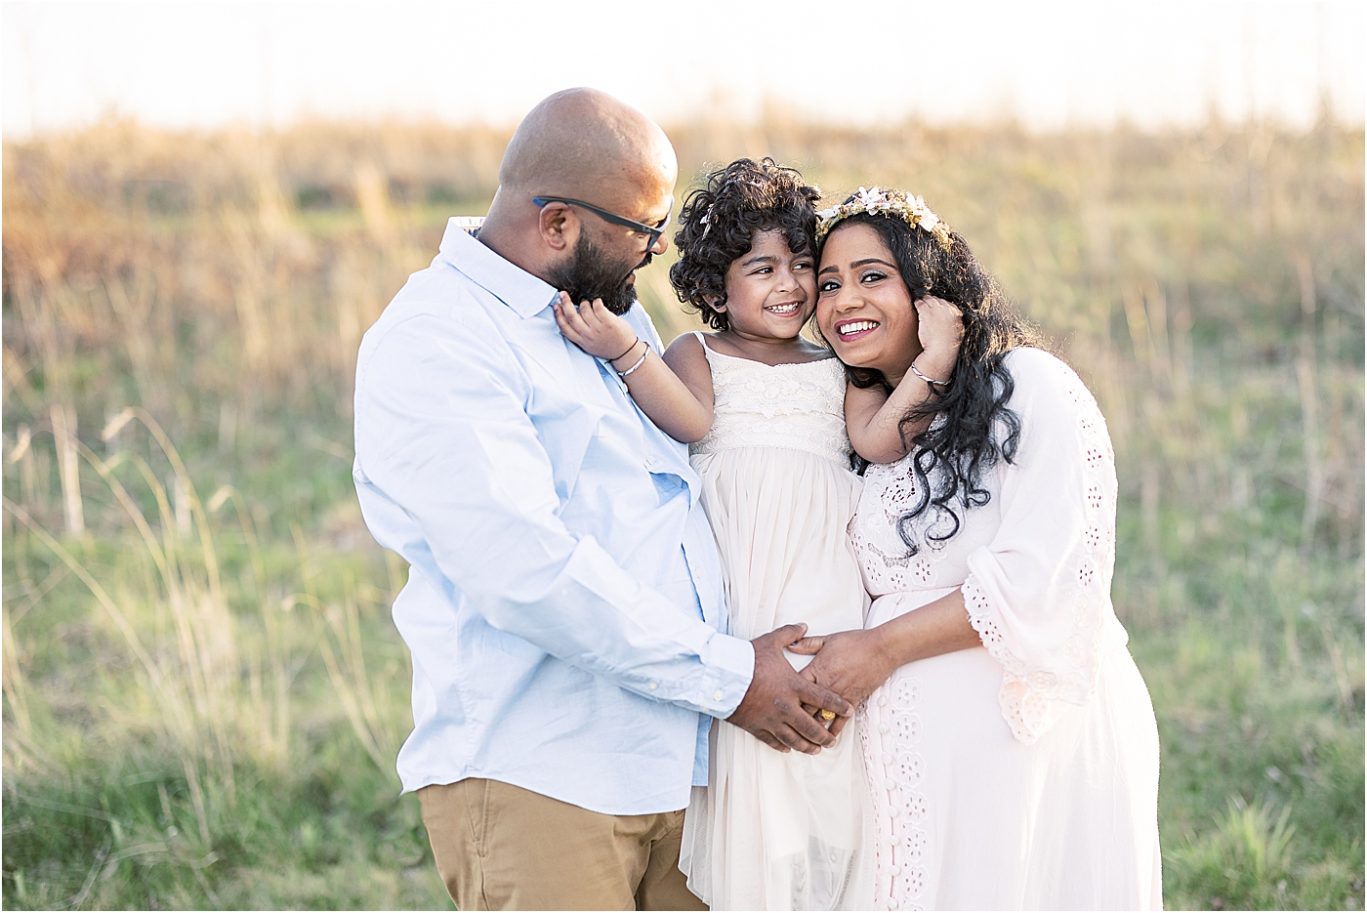 Family maternity session with natural light photographer in Indy, Lindsay Konopa Photography.